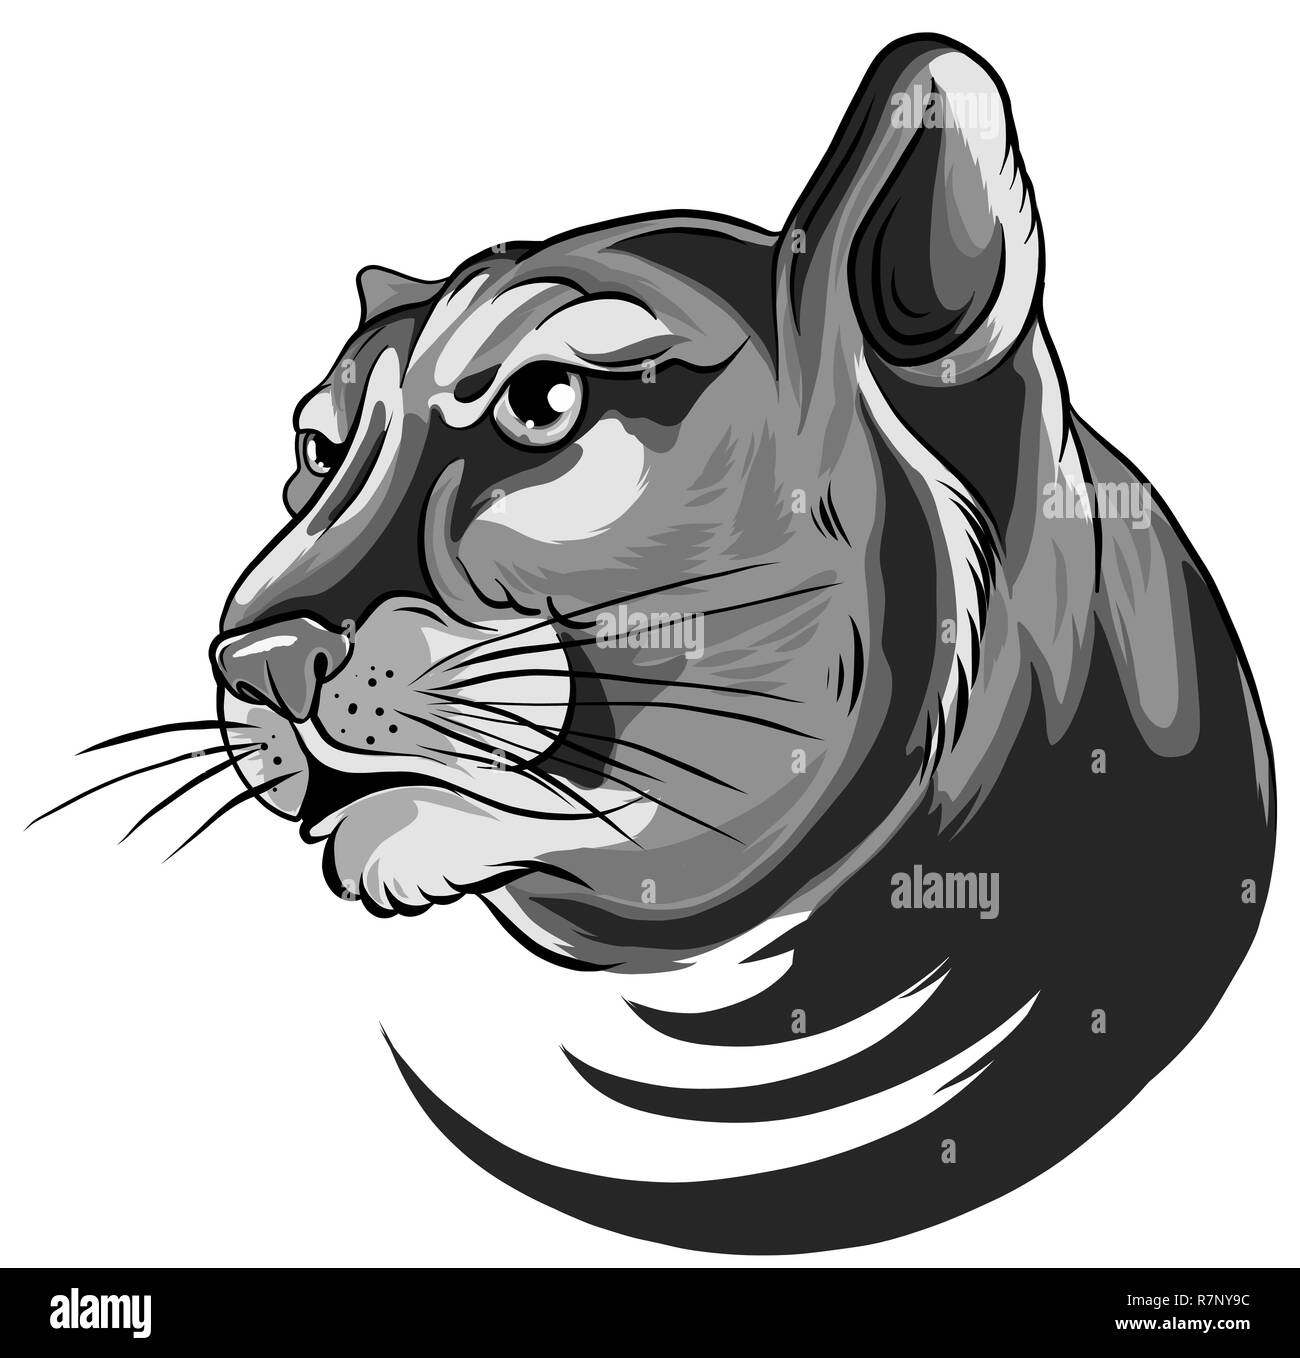 illustration of Cougar Panther Mascot Head Vector Graphic Stock Vector